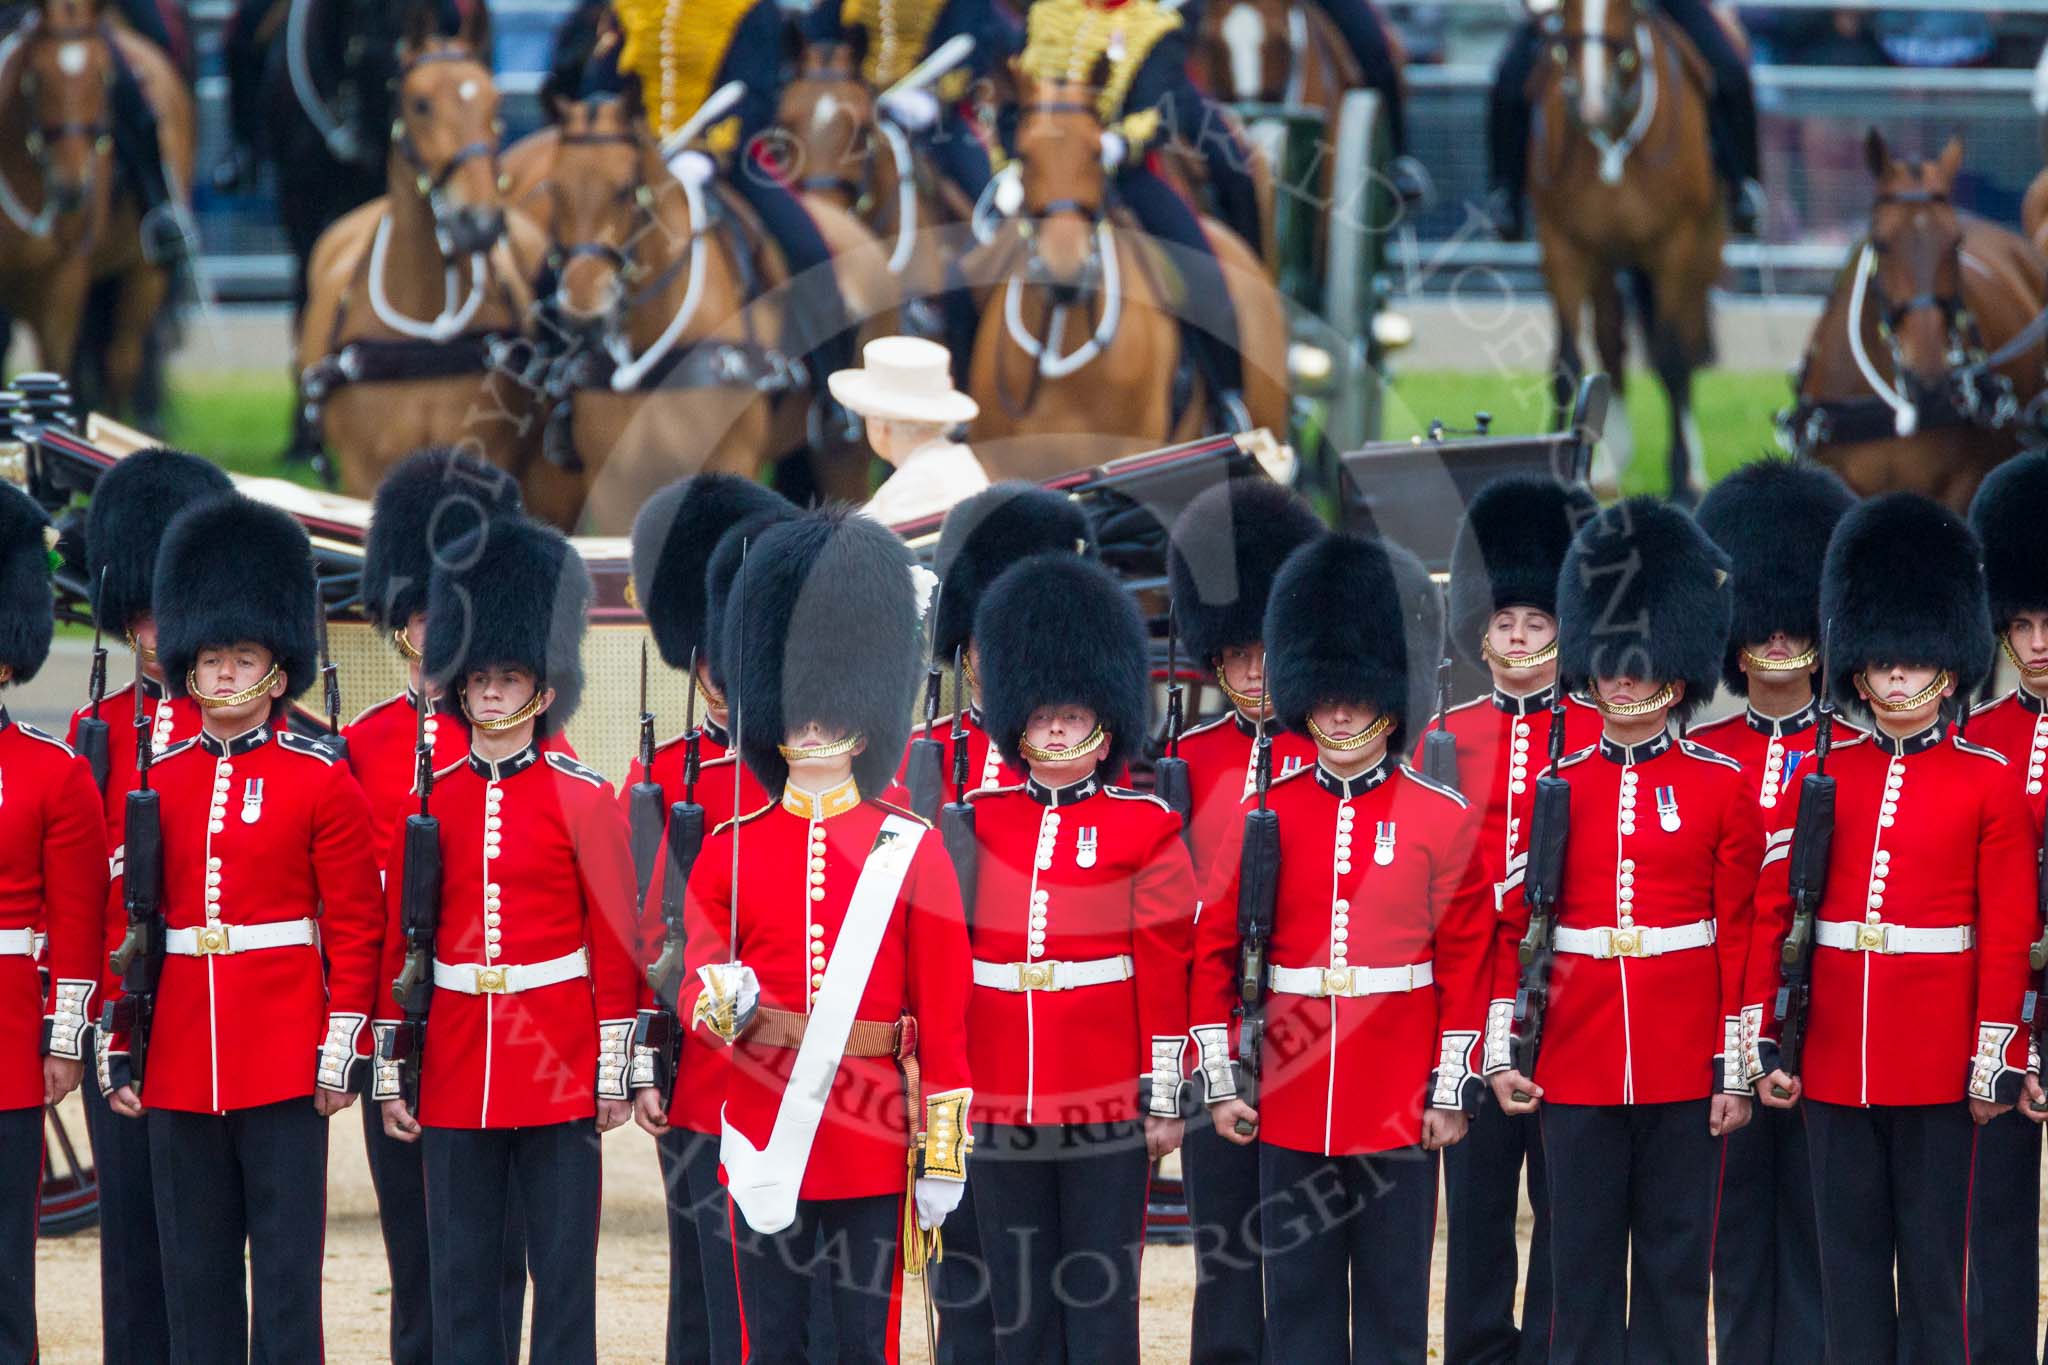 Trooping the Colour 2015. Image #288, 13 June 2015 11:04 Horse Guards Parade, London, UK